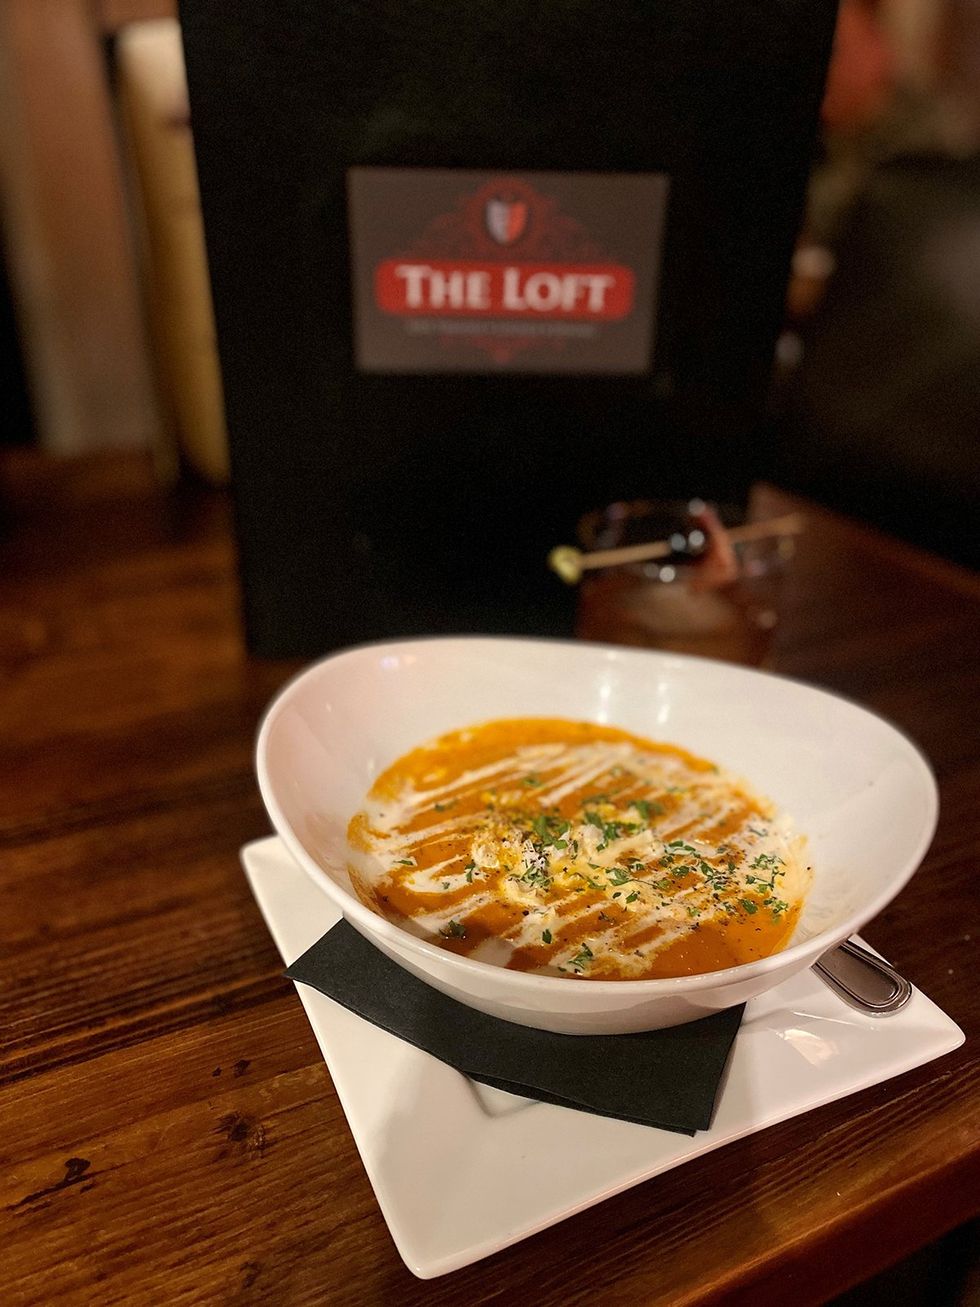 The roasted tomato bisque with lump crabmeat at The Loft